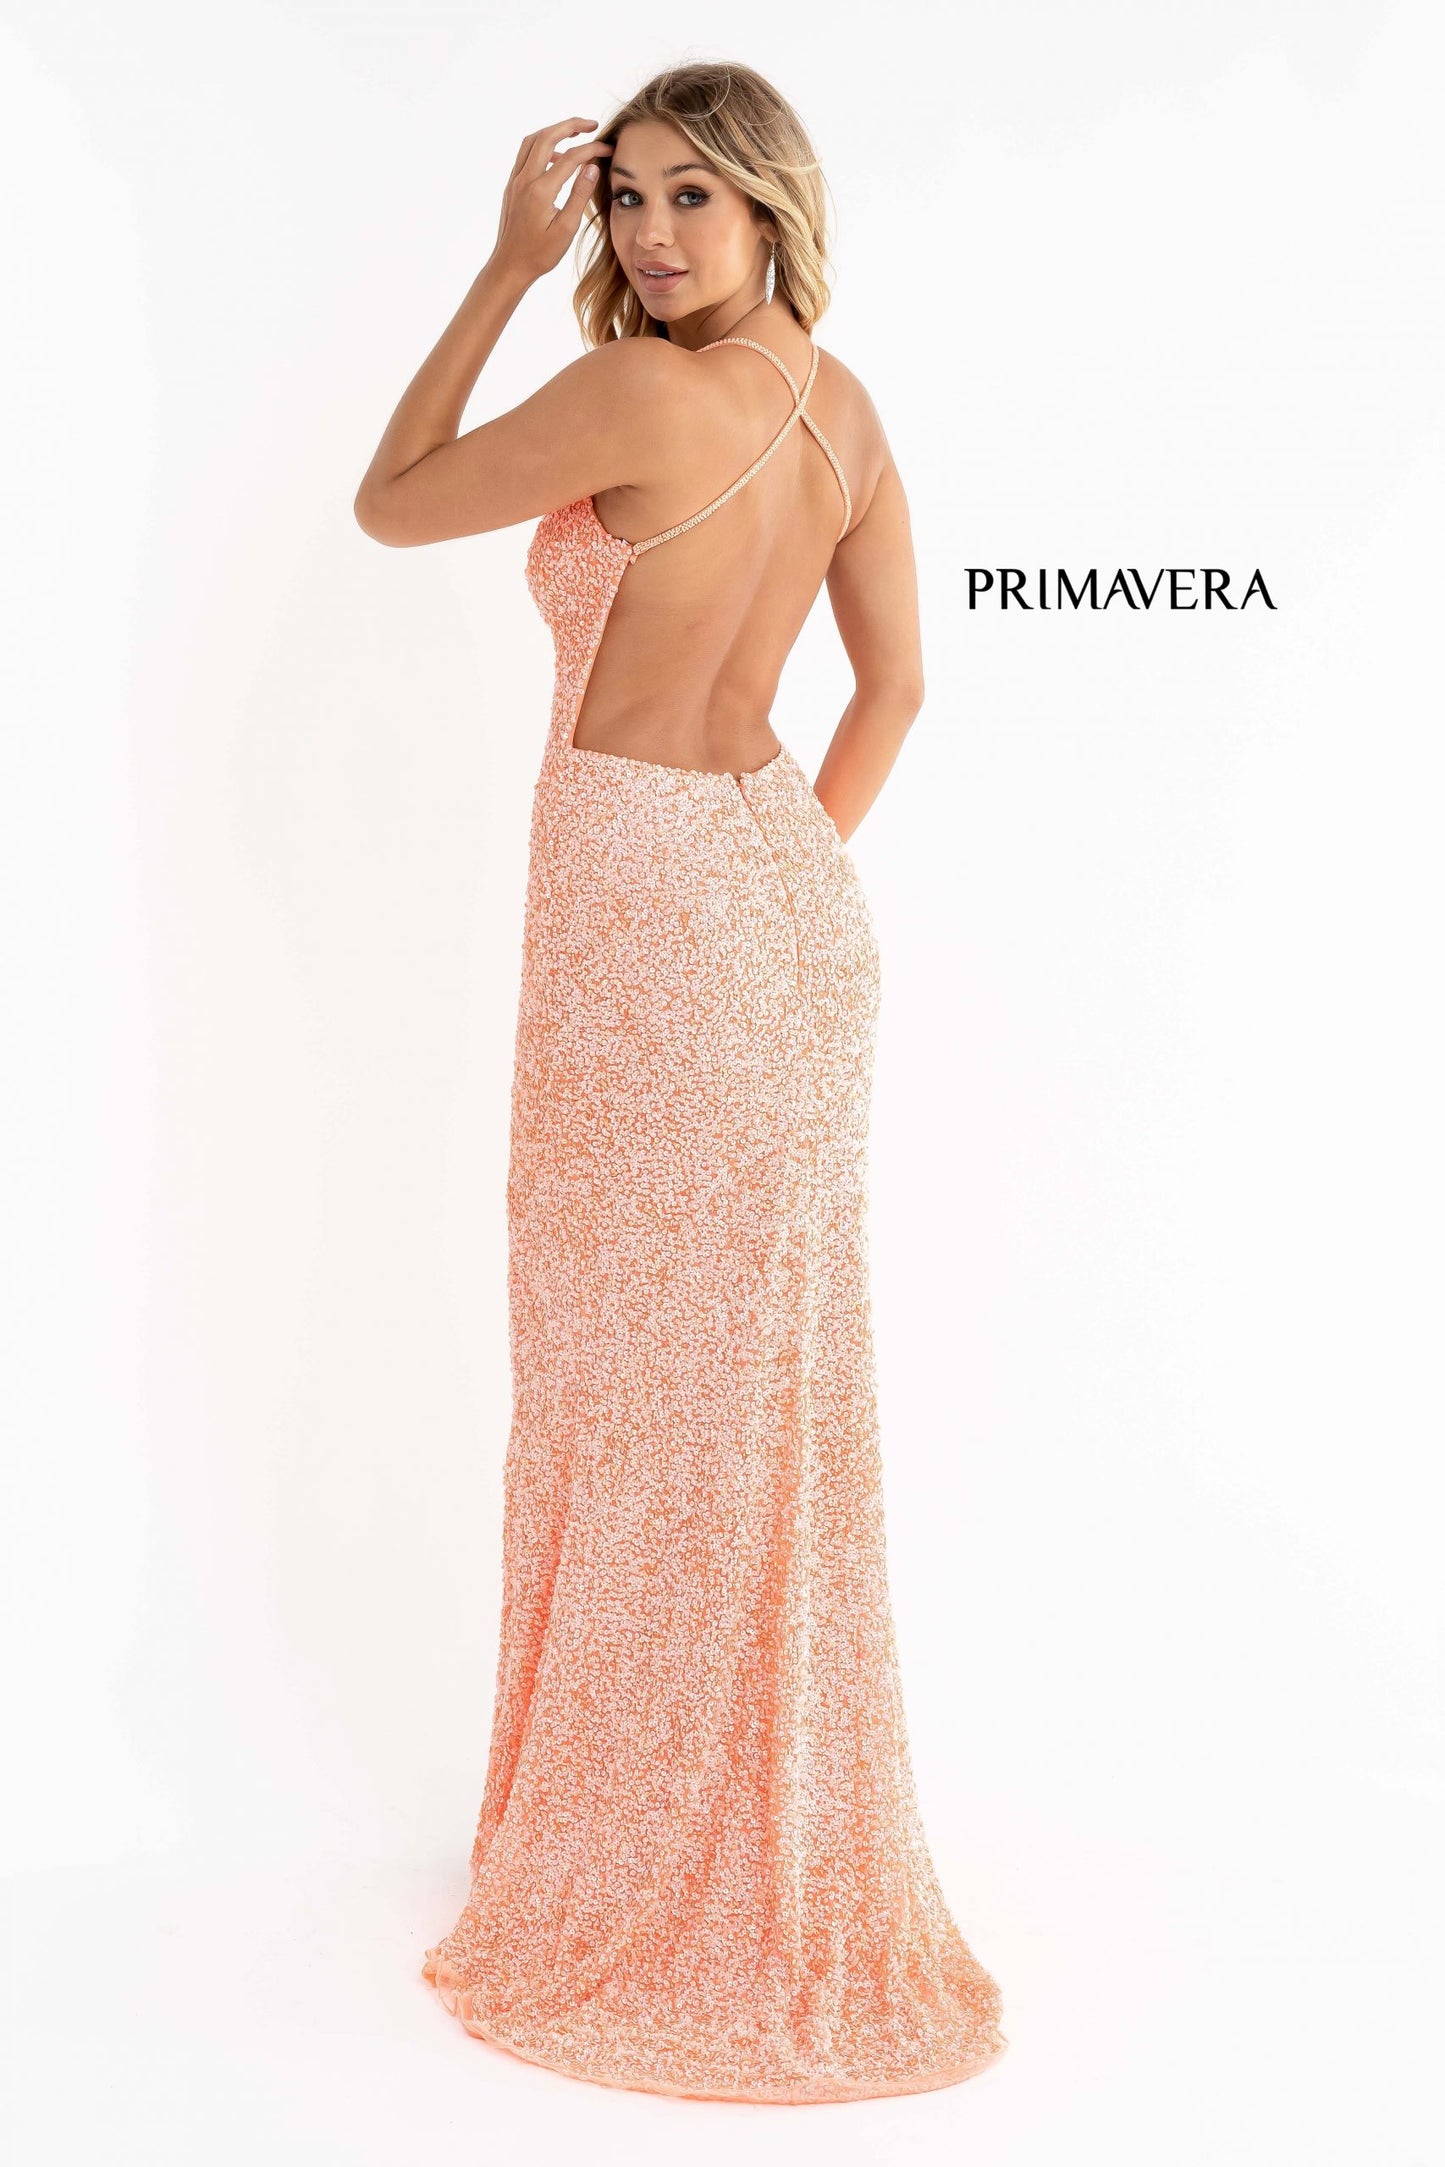 Primavera Couture 3291 Exclusive Prom Dresses.  This long prom dress is embellished throughout with shimmering sequins.  This impressive gown showcases a v neckline, thin beaded straps and crisscrossed straps in the open back. The long slim skirt has a sultry high side front slit. v